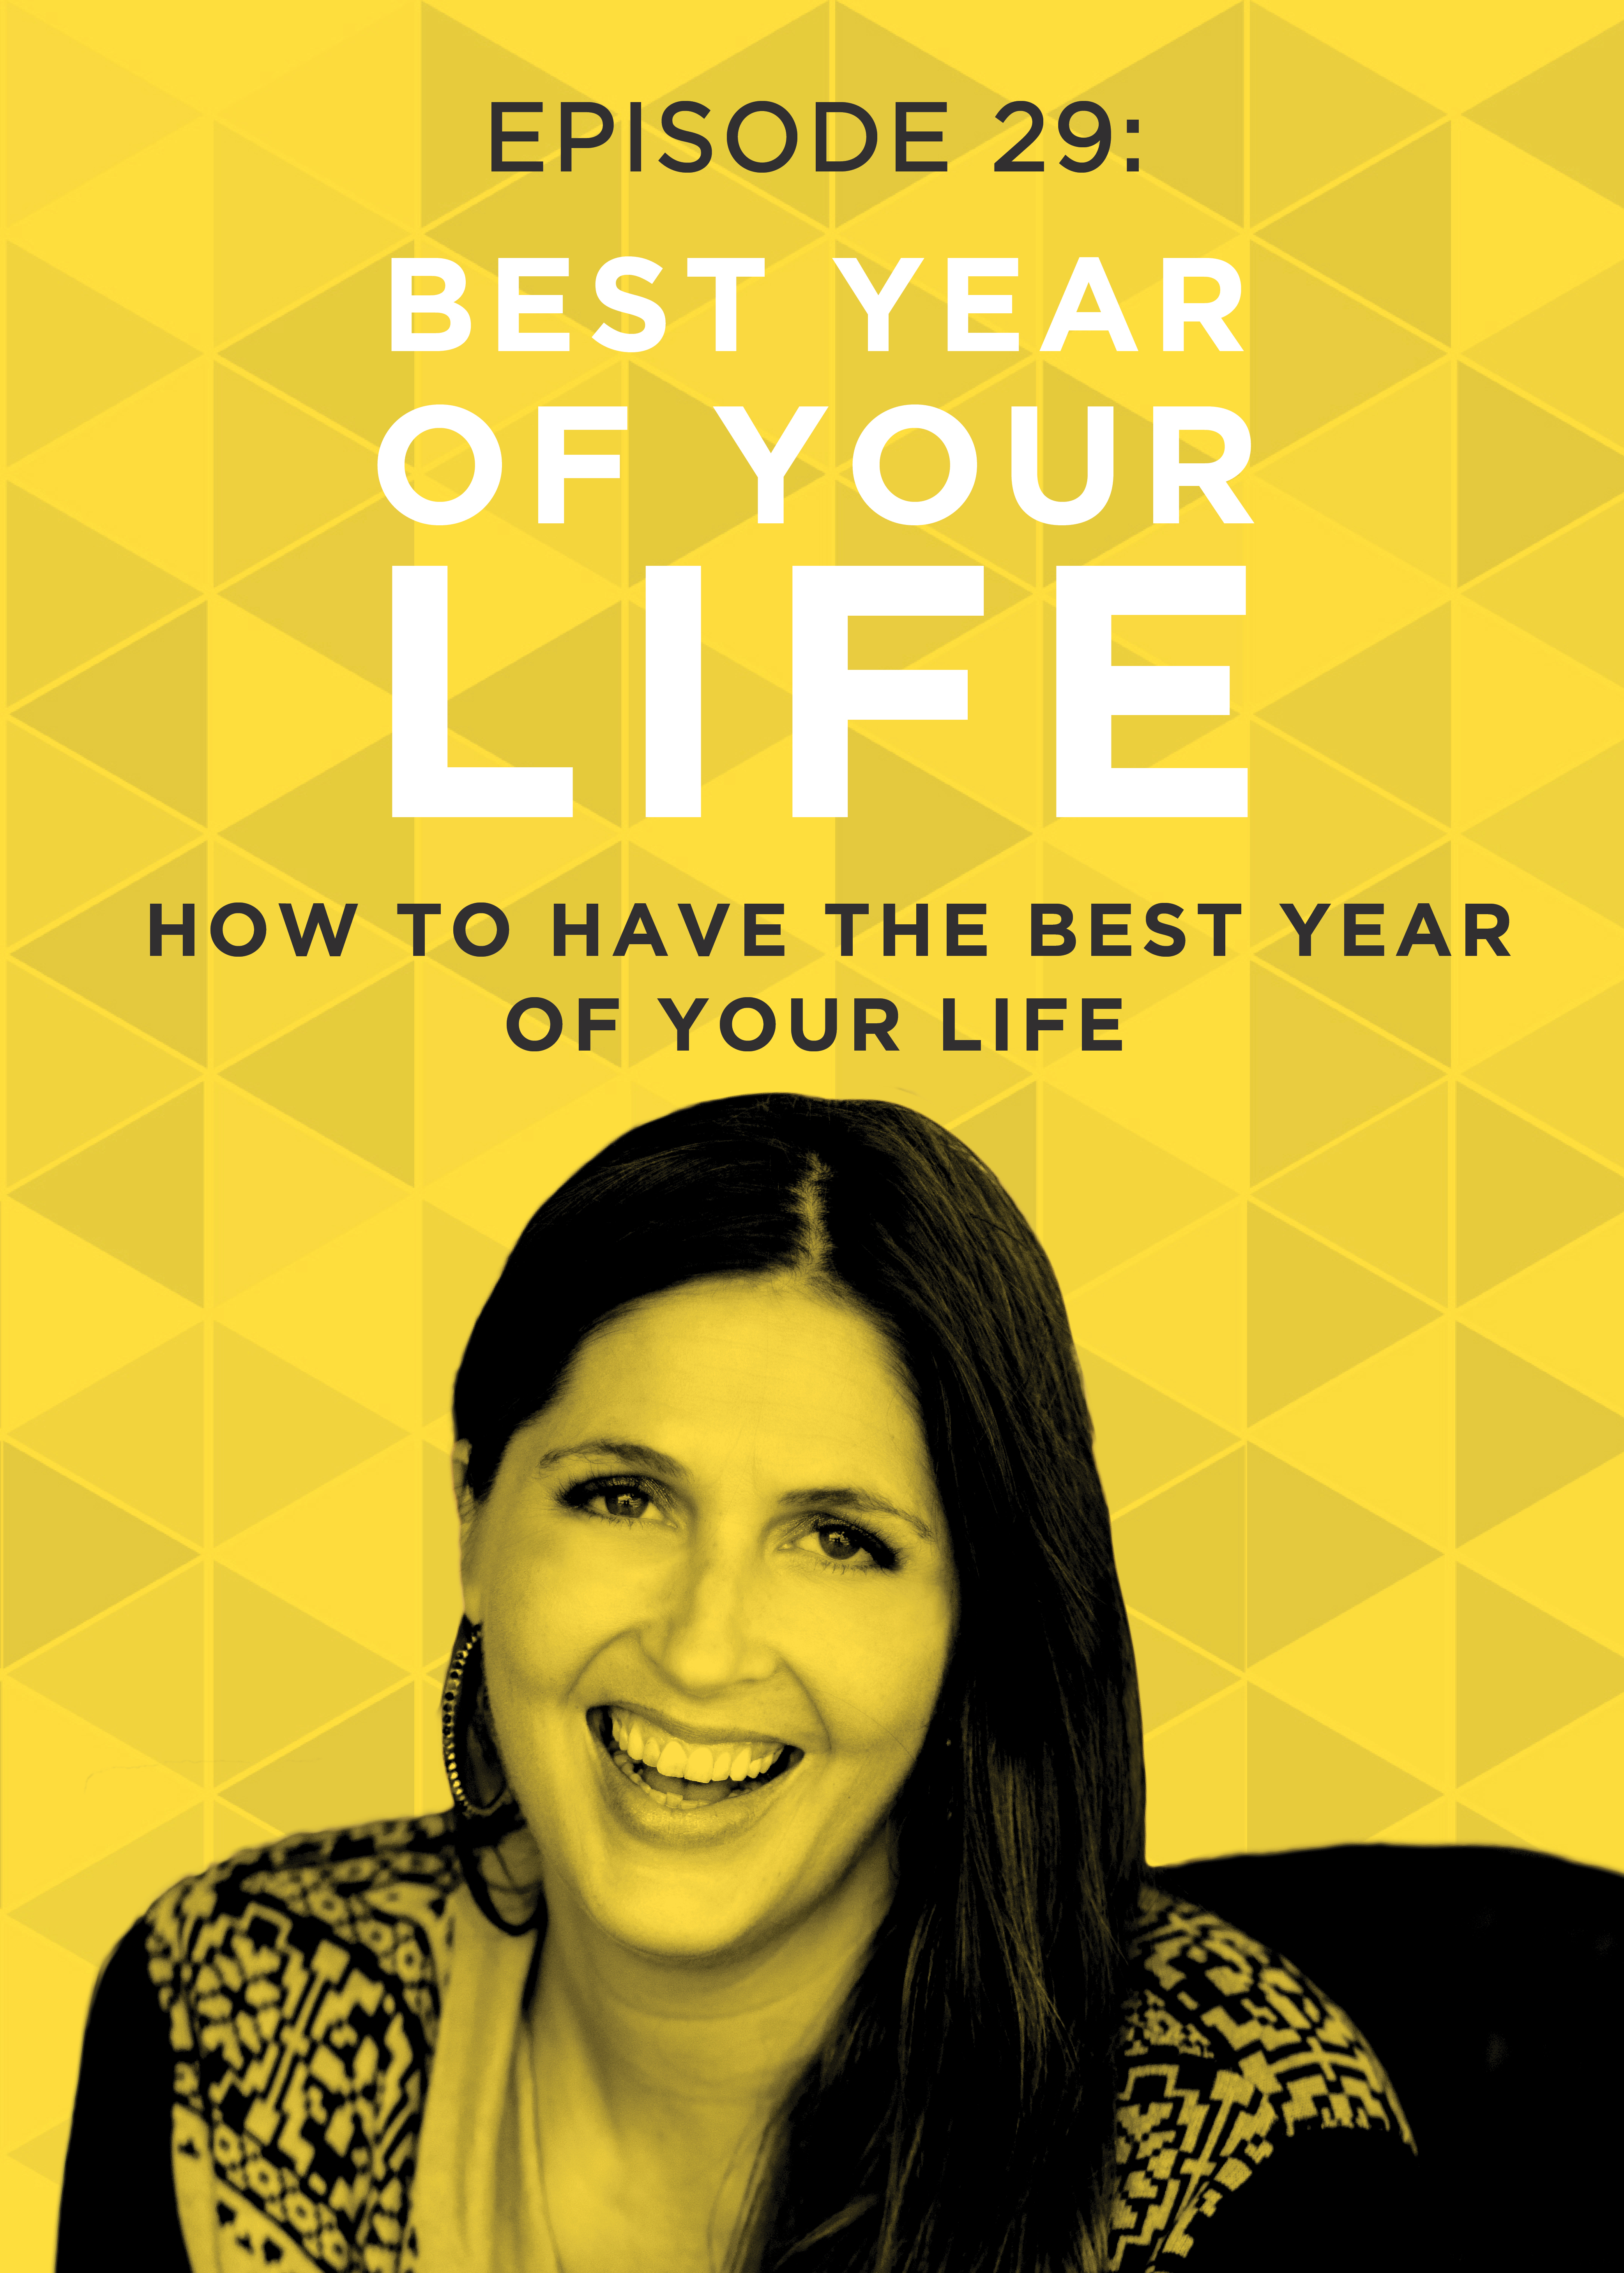 How do you make this coming year the best one yet? The key to creating your best year ever is taking some time to set yourself up for success. In this episode of the Do It Scared™ podcast, Ruth shares 5 steps you can take right now to have the best year of your life! #doitscared #bestyearever #loveyourlife